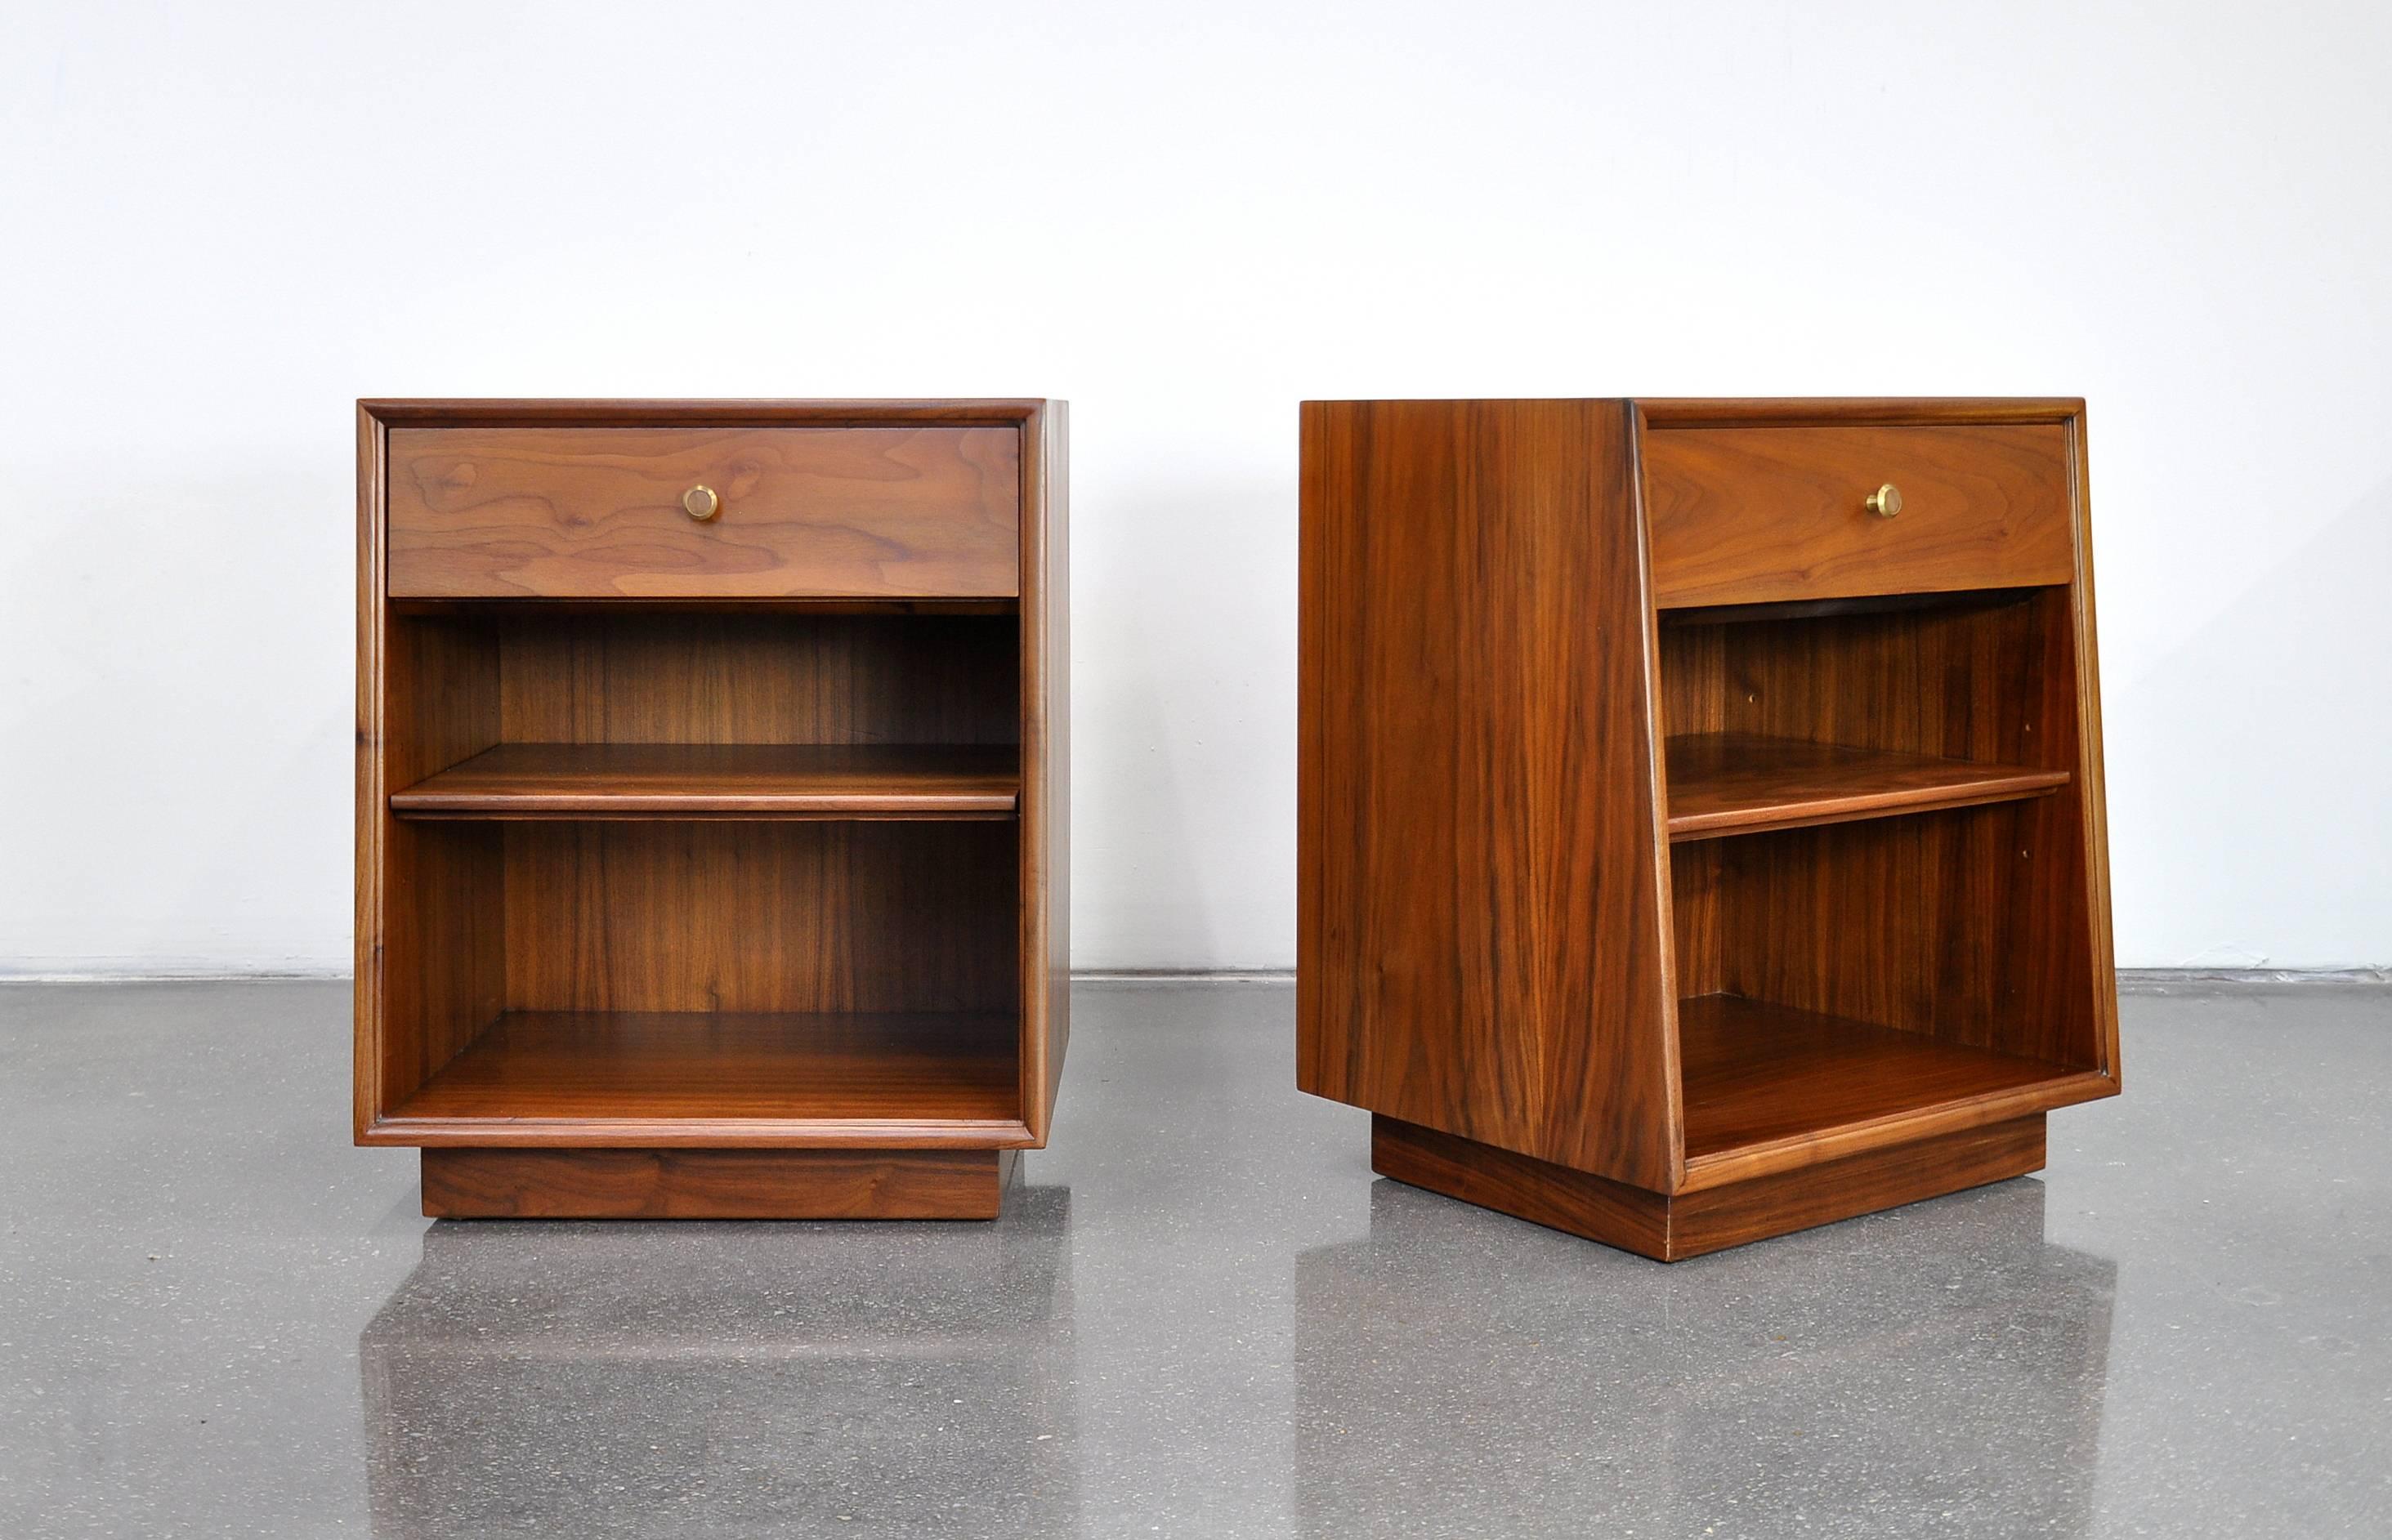 A very nice pair of Mid-Century Modern vintage nightstands designed by Kipp Stewart and Stewart MacDougall for the Drexel Declaration line in the 1960s. Each bedside table features a drawer with original pull over an adjustable shelf and provides a